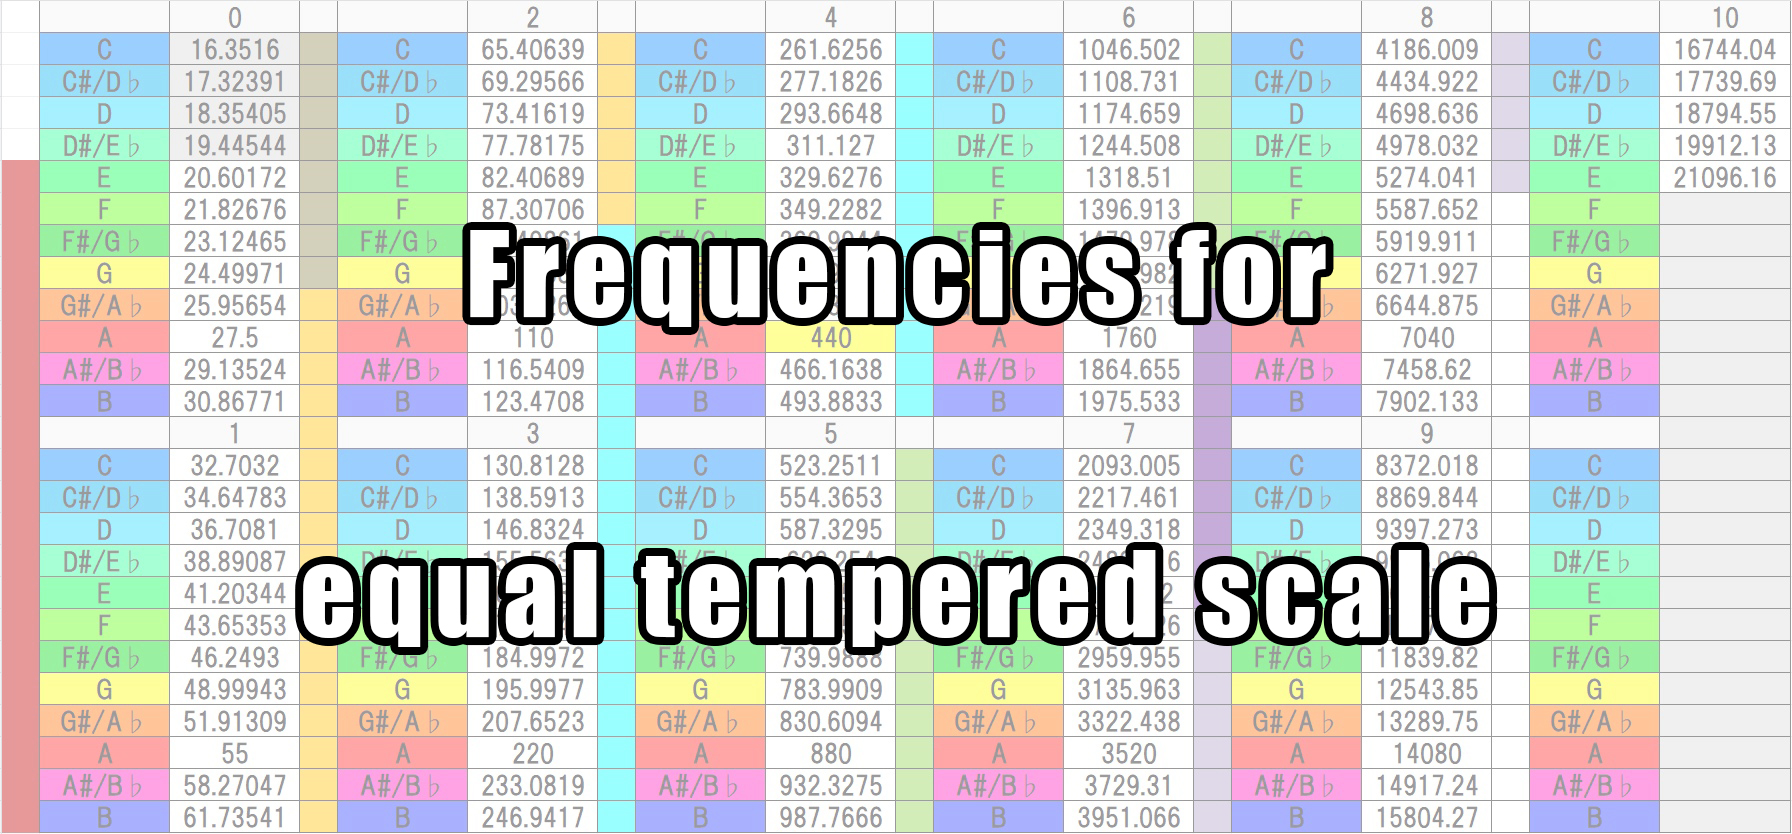 frequencies-for-equal-tempered-scale-khufrudamo-notes-official-web-site